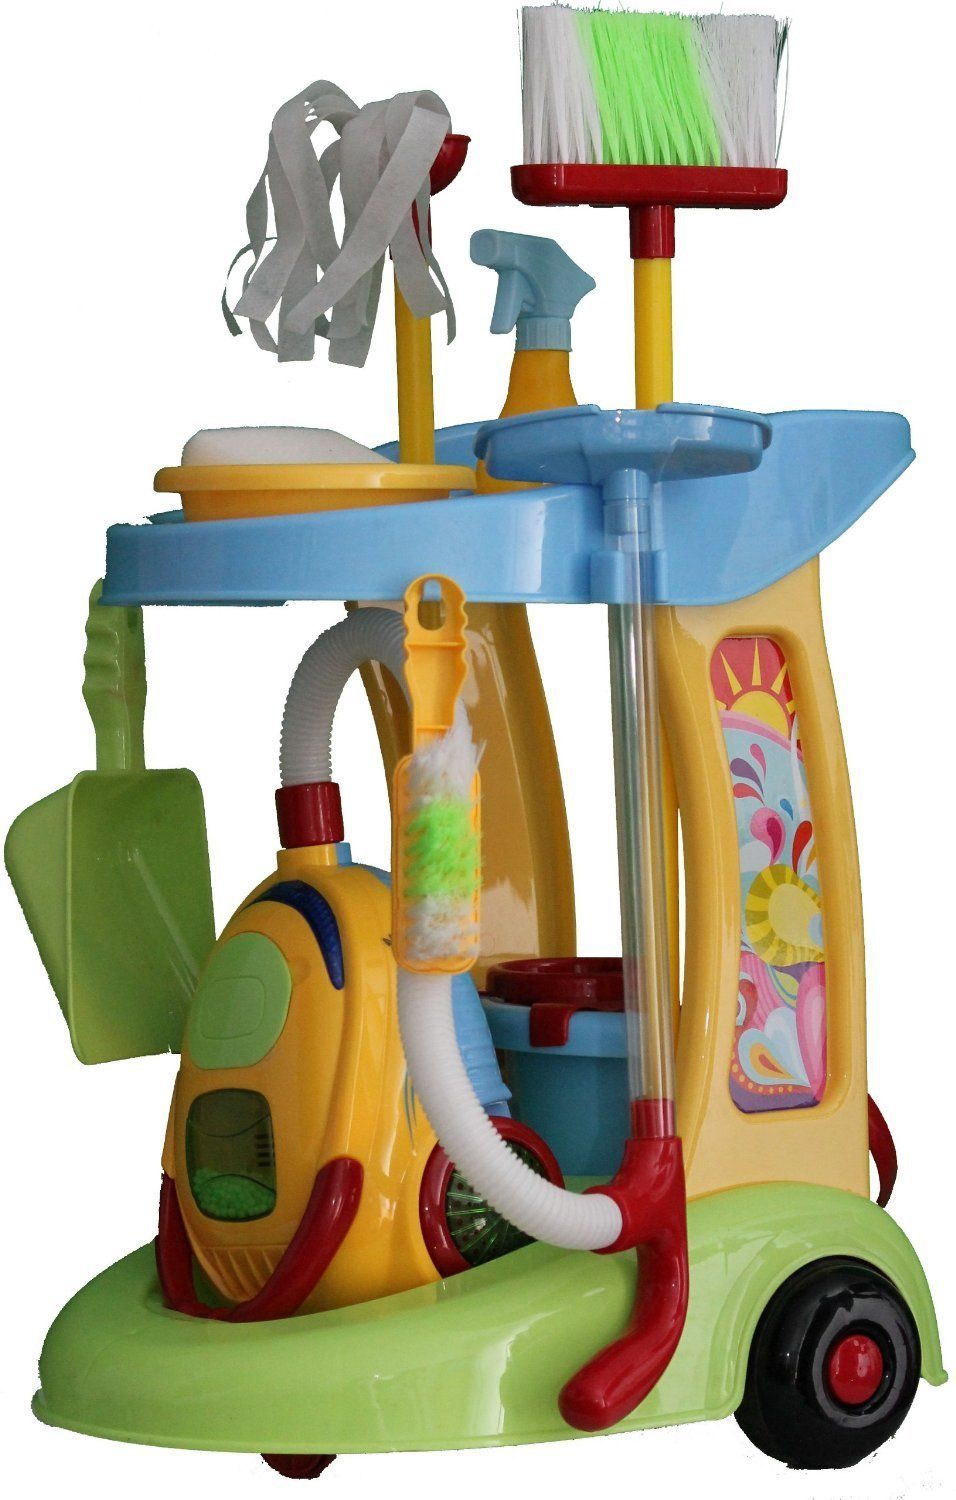 <a href="http://www.amazon.com/Cleaning-Trolley-Cleaner-And-Supplys/dp/B00AAC0J7W/ref=sr_1_2?s=toys-and-games&ie=UTF8&qid=1360954899&sr=1-2&keywords=my+cleaning+trolley&tag=thehuffingtop-20&ascsubtag=5b9cd73de4b03a1dcc82528c%2C-1%2C-1%2Cd%2C0%2C0%2Chp-fil-am%3D0%2C0%3A0%2C0%2C0%2C0" role="link" data-amazon-link="true" rel="nofollow" class=" js-entry-link cet-external-link" data-vars-item-name="My Cleaning Trolley" data-vars-item-type="text" data-vars-unit-name="5b9cd73de4b03a1dcc82528c" data-vars-unit-type="buzz_body" data-vars-target-content-id="http://www.amazon.com/Cleaning-Trolley-Cleaner-And-Supplys/dp/B00AAC0J7W/ref=sr_1_2?s=toys-and-games&ie=UTF8&qid=1360954899&sr=1-2&keywords=my+cleaning+trolley&tag=thehuffingtop-20&ascsubtag=5b9cd73de4b03a1dcc82528c%2C-1%2C-1%2Cd%2C0%2C0%2Chp-fil-am%3D0%2C0%3A0%2C0%2C0%2C0" data-vars-target-content-type="url" data-vars-type="web_external_link" data-vars-subunit-name="before_you_go_slideshow" data-vars-subunit-type="component" data-vars-position-in-subunit="4">My Cleaning Trolley</a>